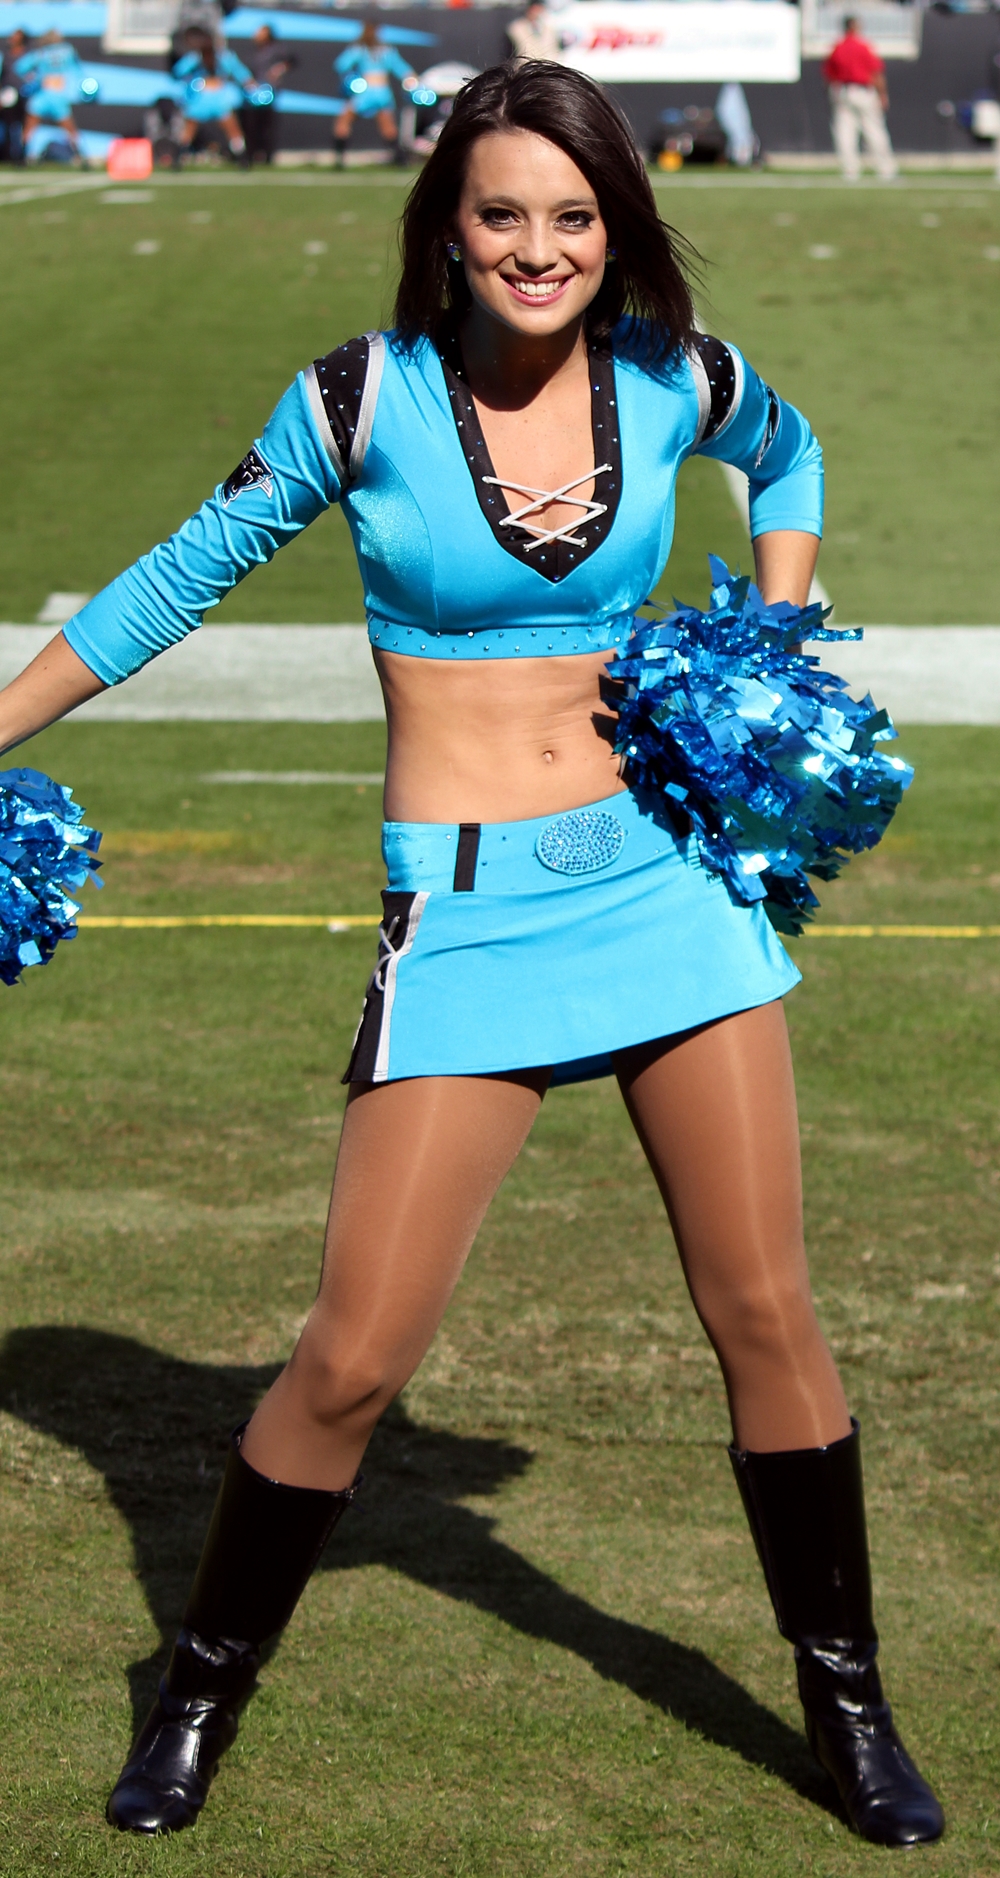 Another Super Rookie in Charlotte, TopCat Laura B.